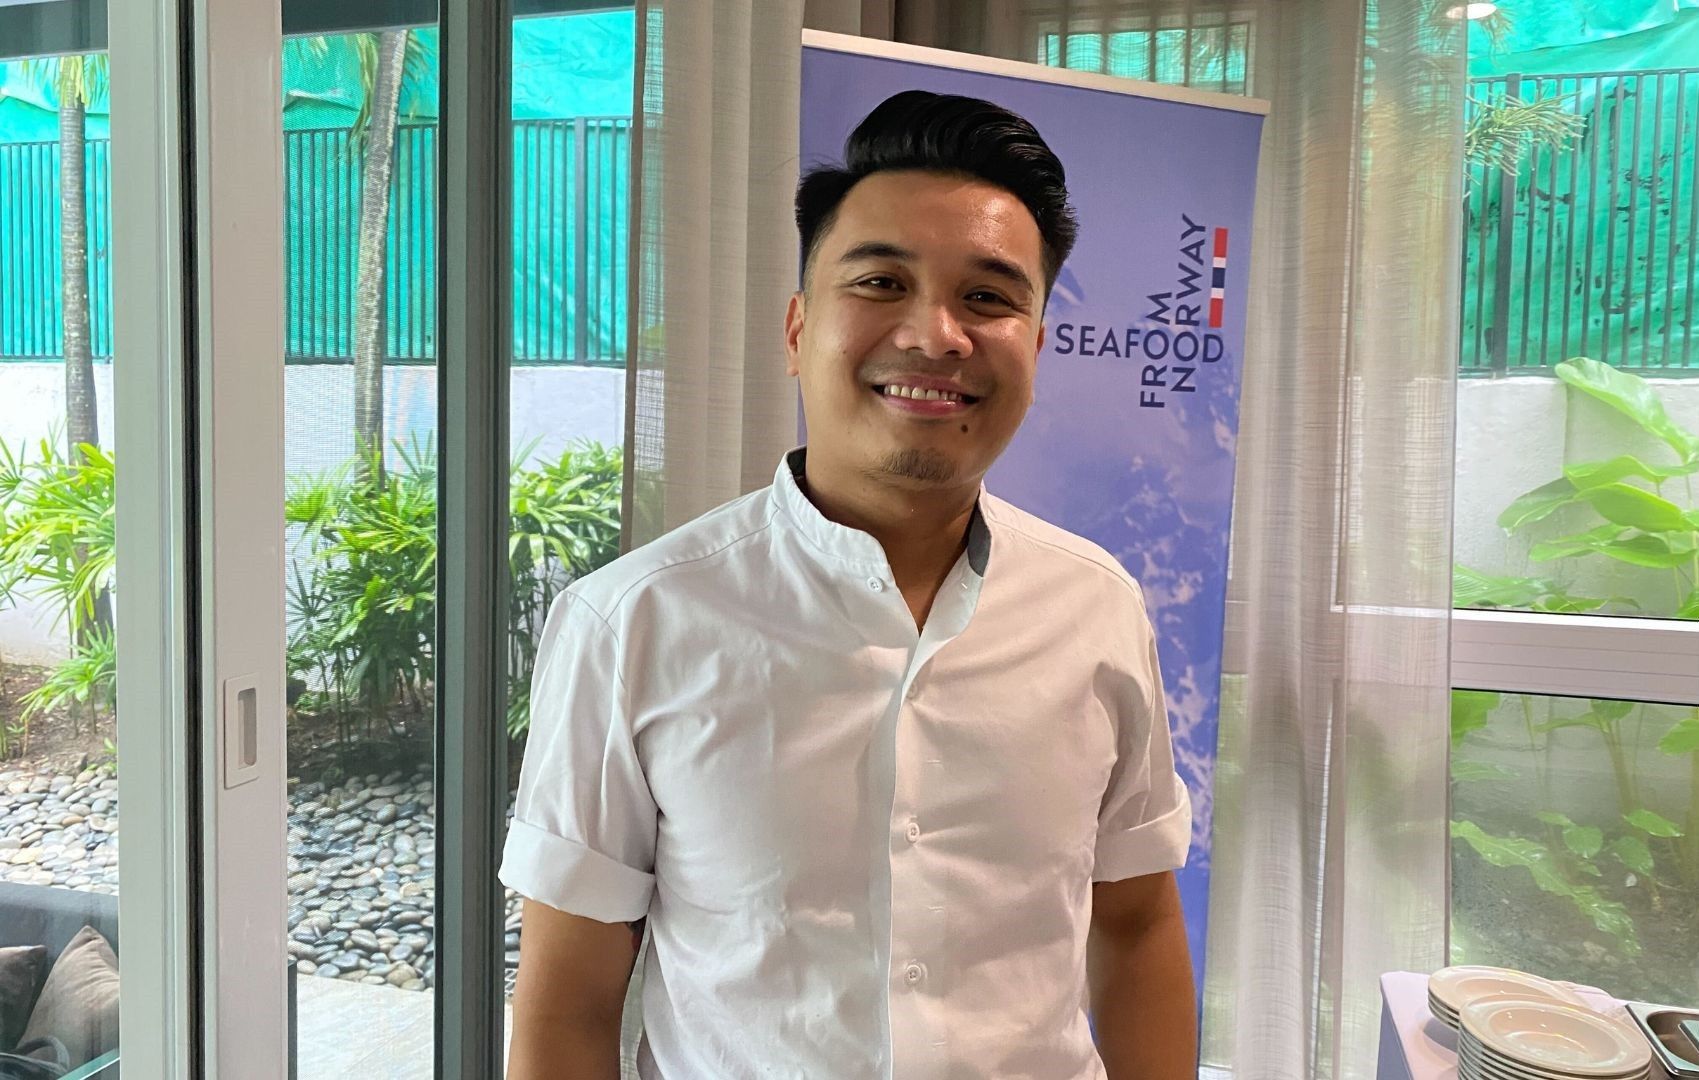 Norway-based Pinoy chef wants to prove himself through 'neo-Filipino' cuisine